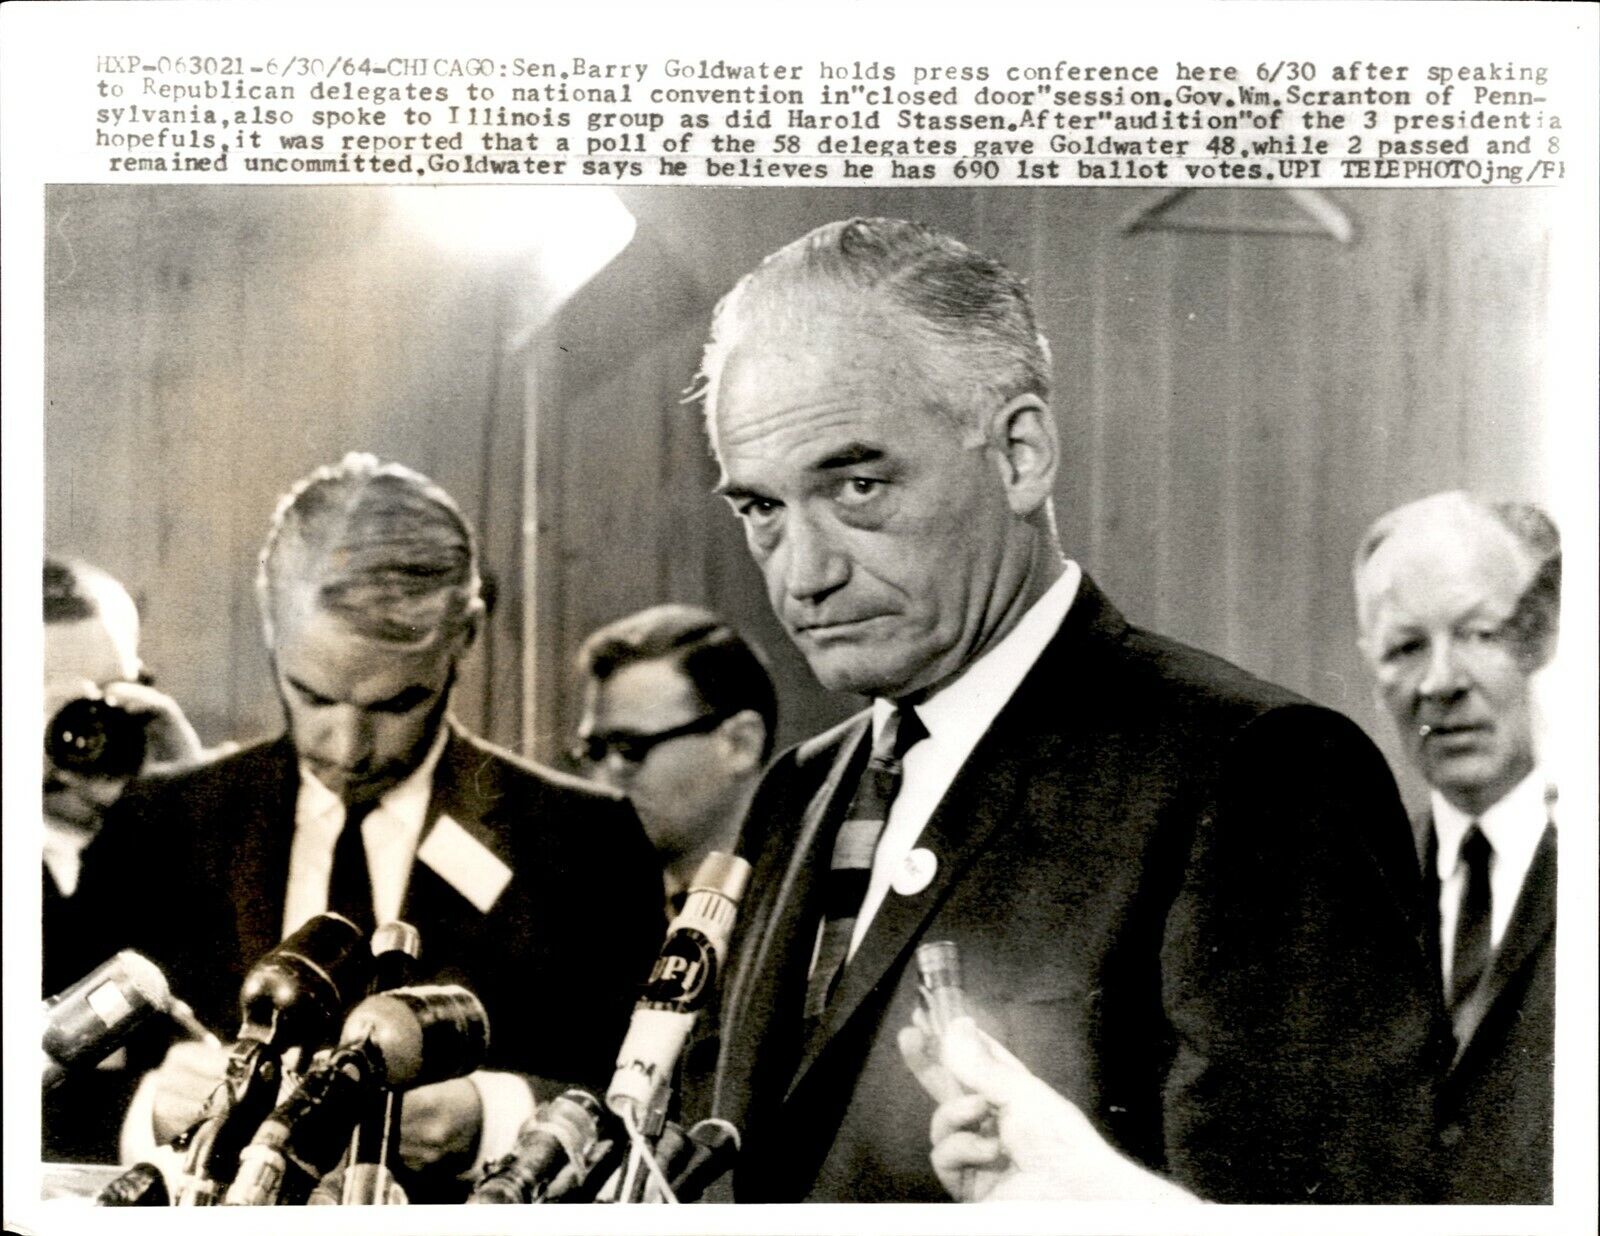 GA150 1964 Wire Photo SEN BARRY GOLDWATER PRESS CONFERENCE PRESIDENTIAL NOMINEE